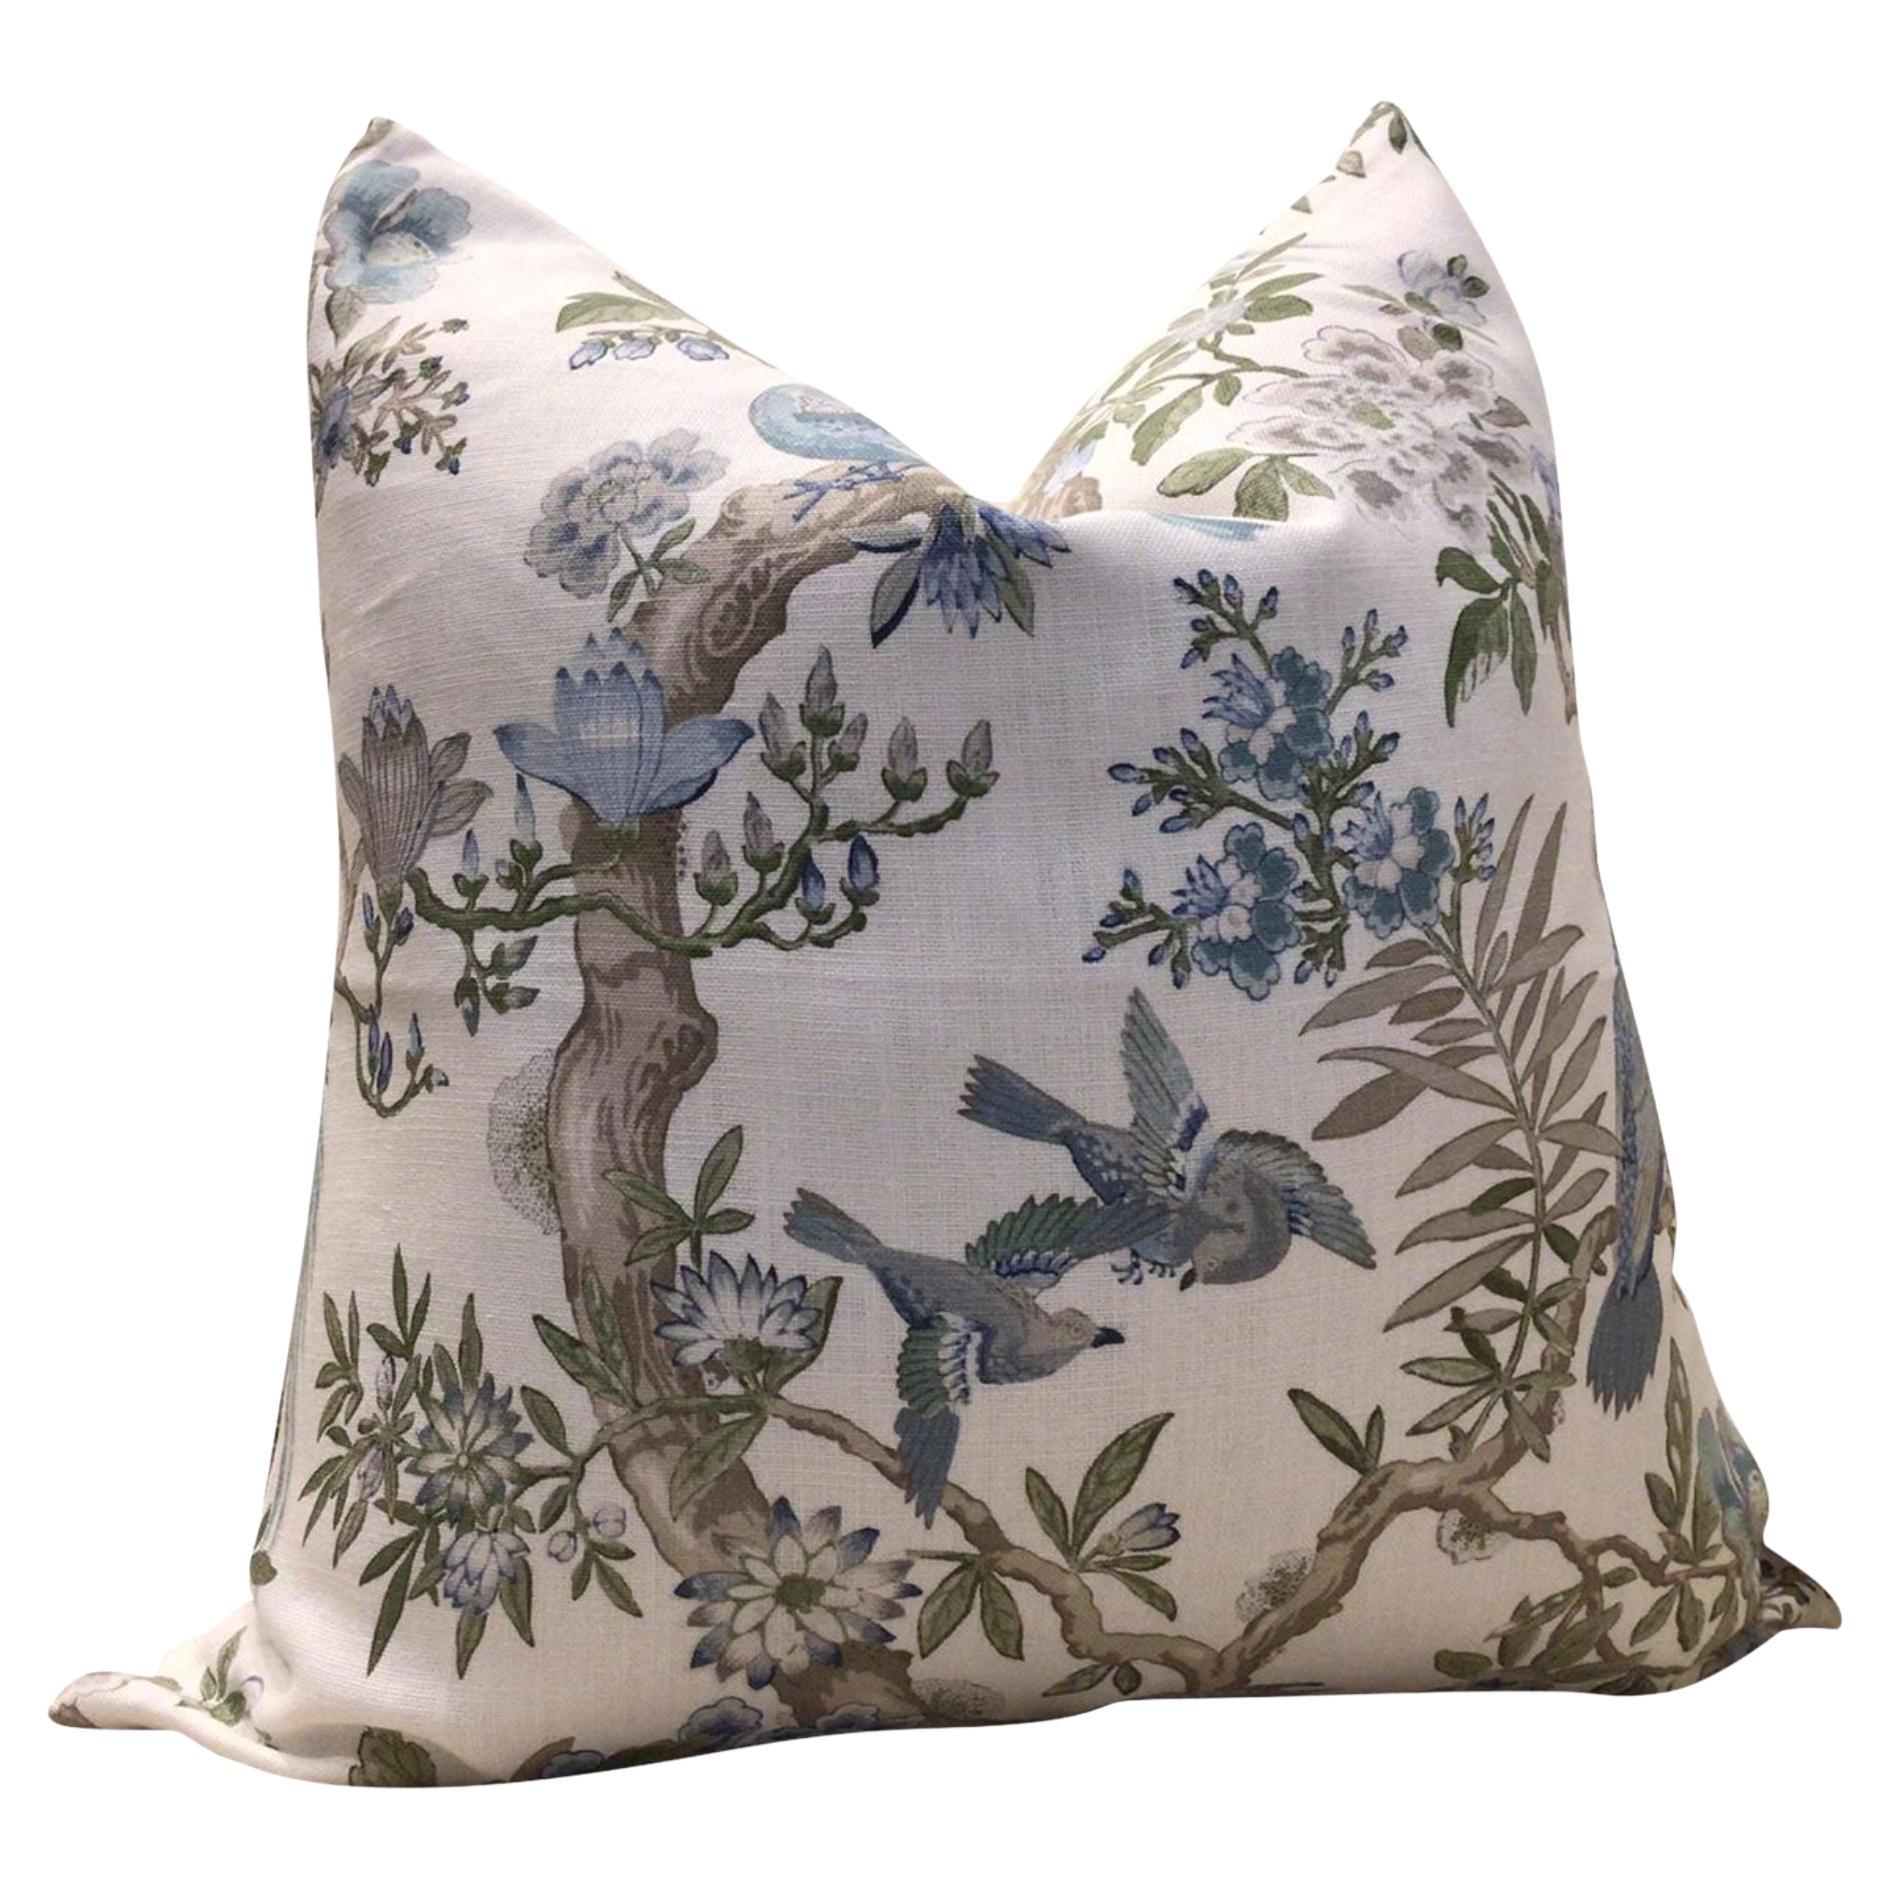 Gp and J Baker “ Eltham” in Blue and White Pillows- a Pair For Sale